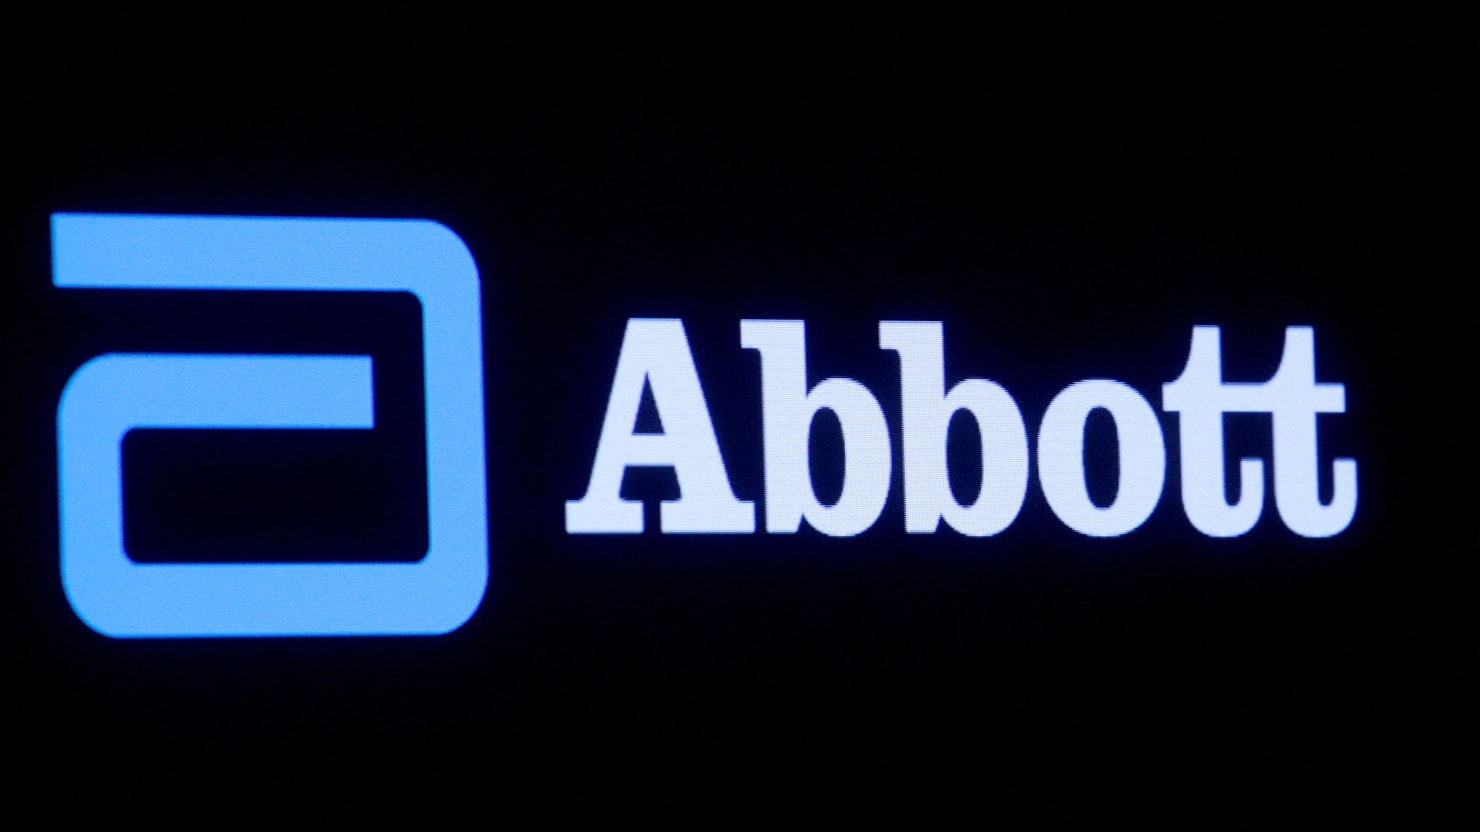 The FDA is investigating the death of another baby who was consuming Abbott Laboratories’ formula